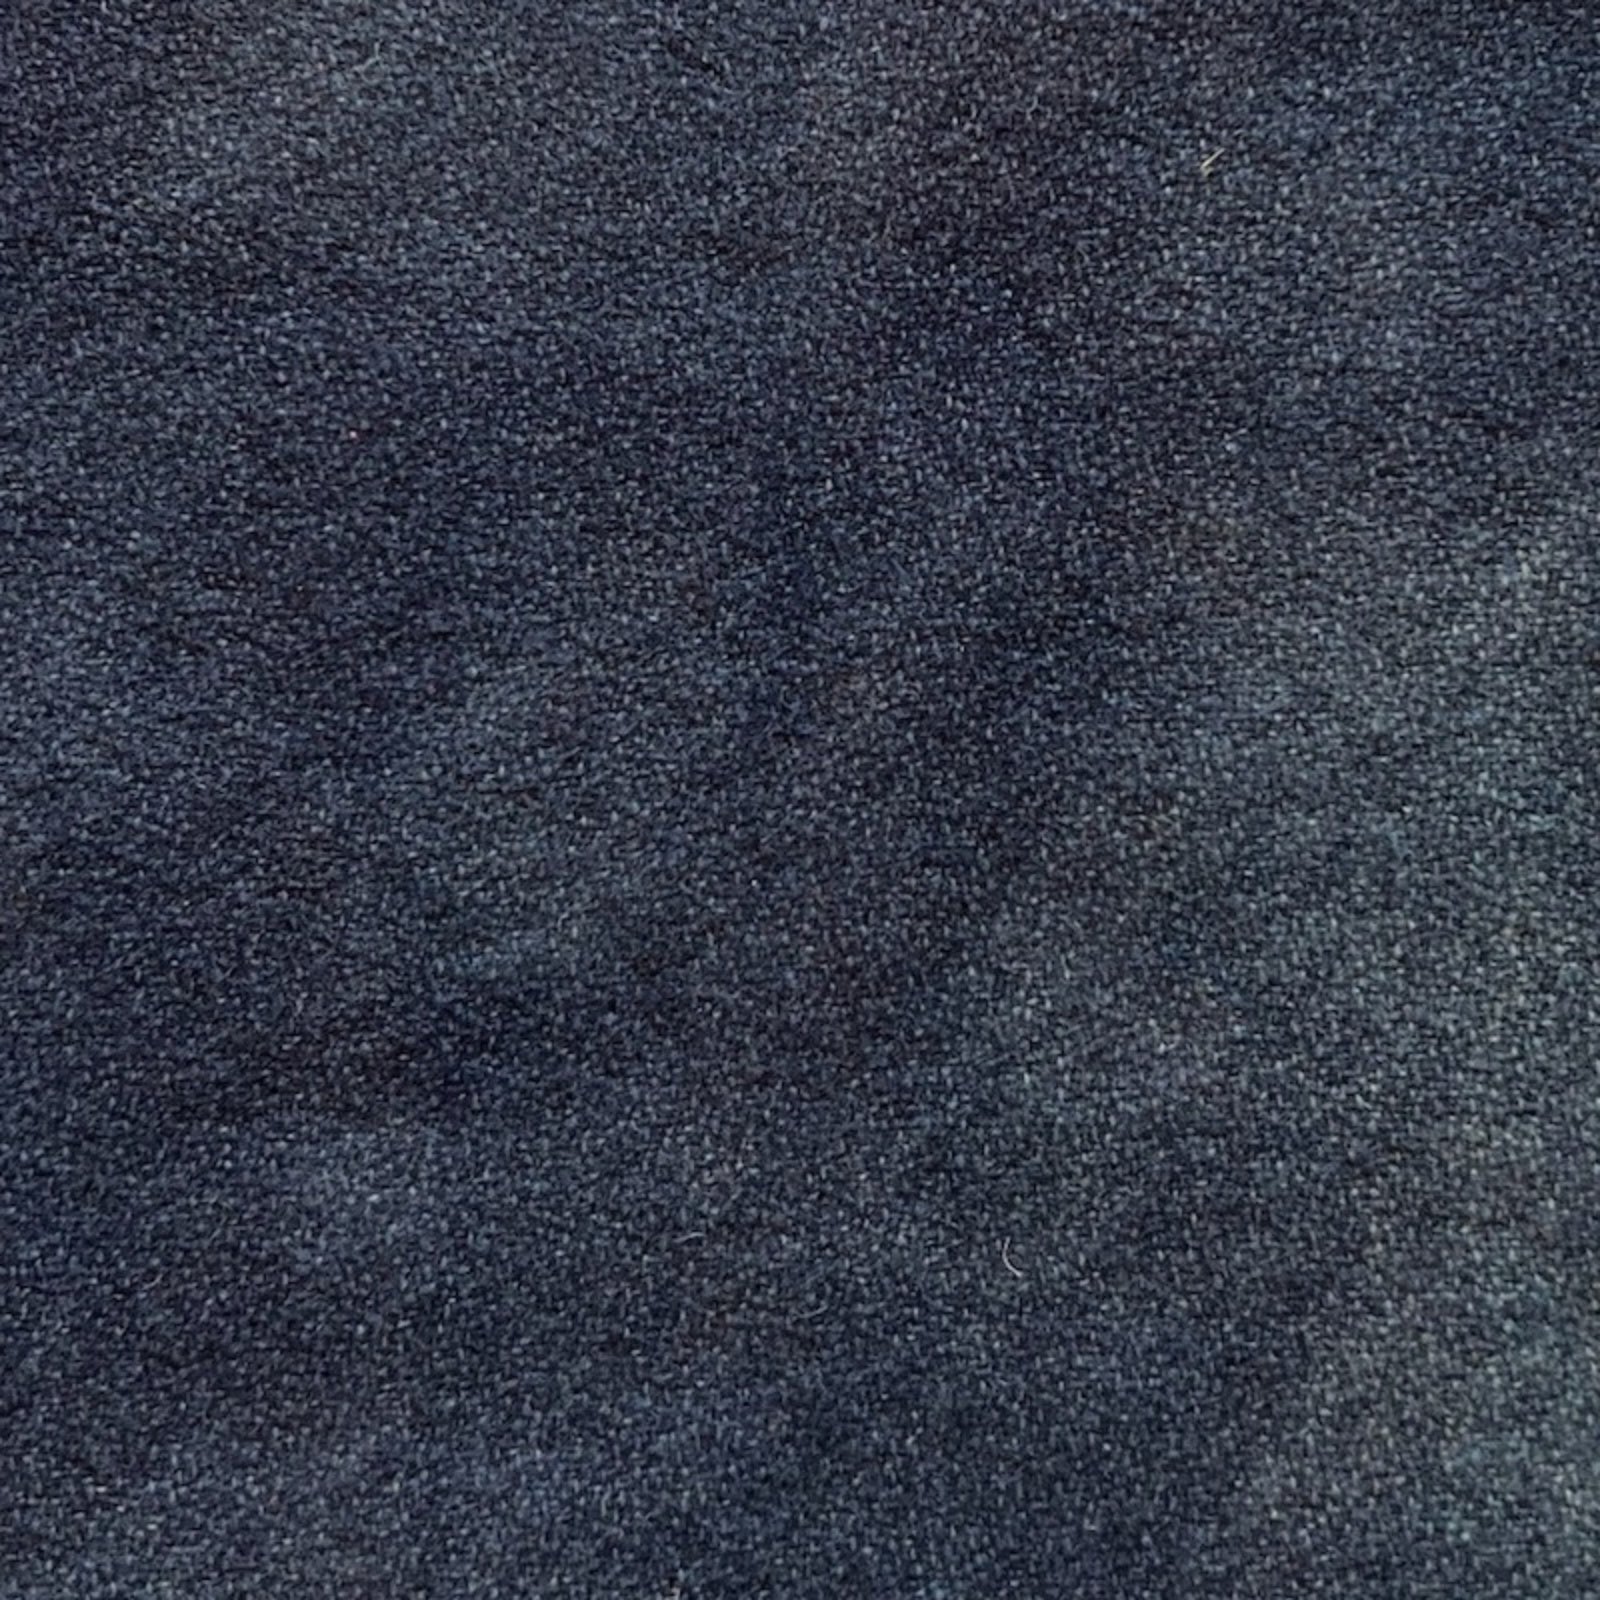 Patina Blue - Colorama Hand Dyed Wool - Offered by HoneyBee Hive Rug Hooking